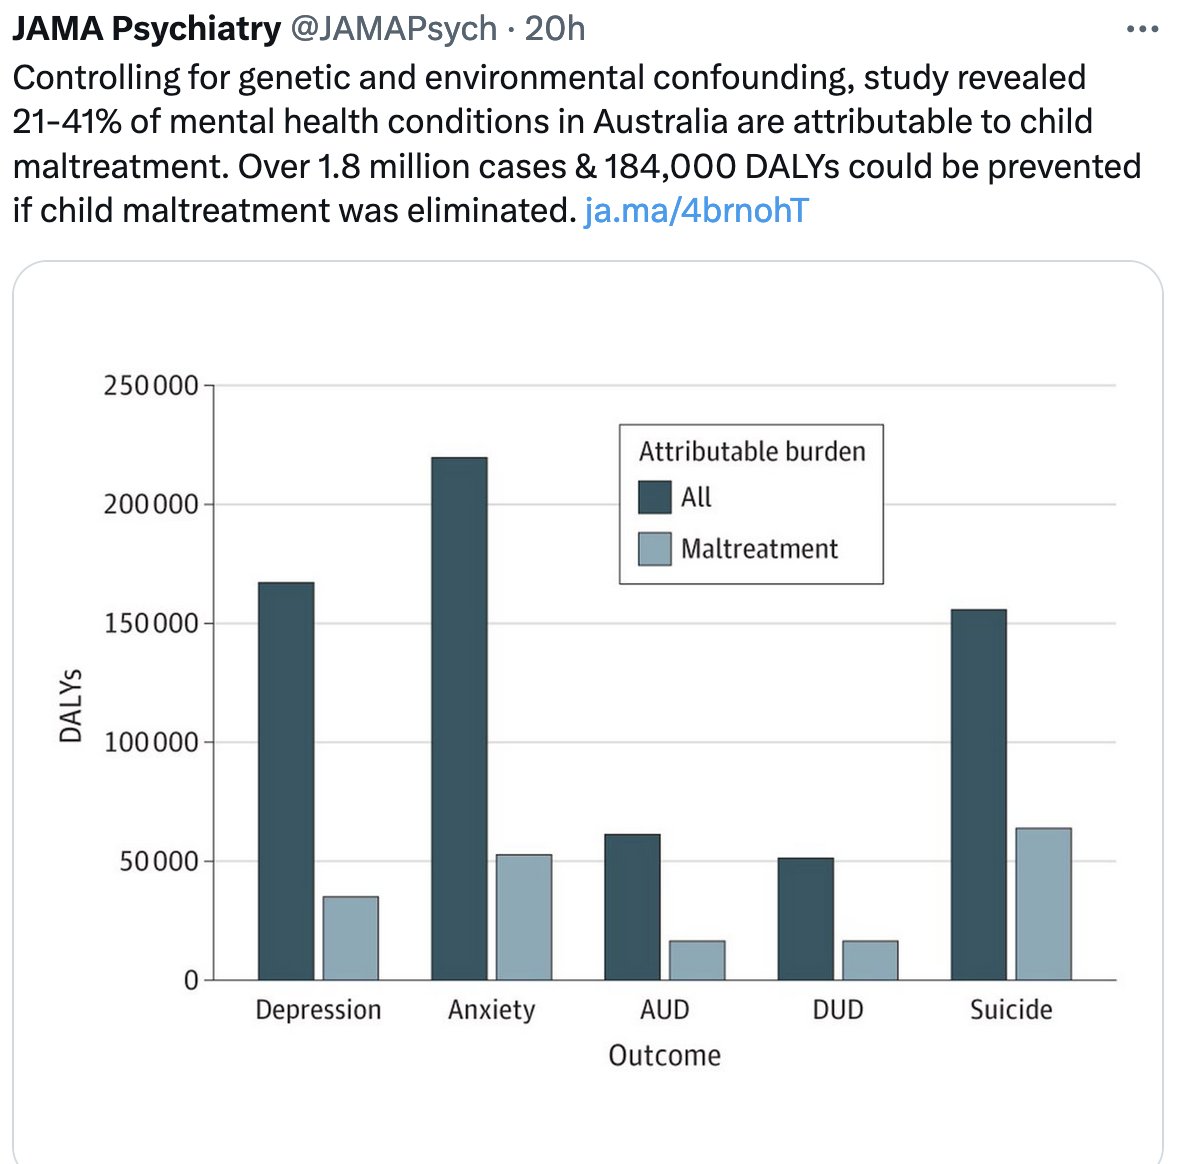 'Close to a quarter of depressive, anxiety, and substance use disorders could be prevented if exposure to child maltreatment was eradicated' @LucyGrummitt @JAMAPsych  jamanetwork.com/journals/jamap…